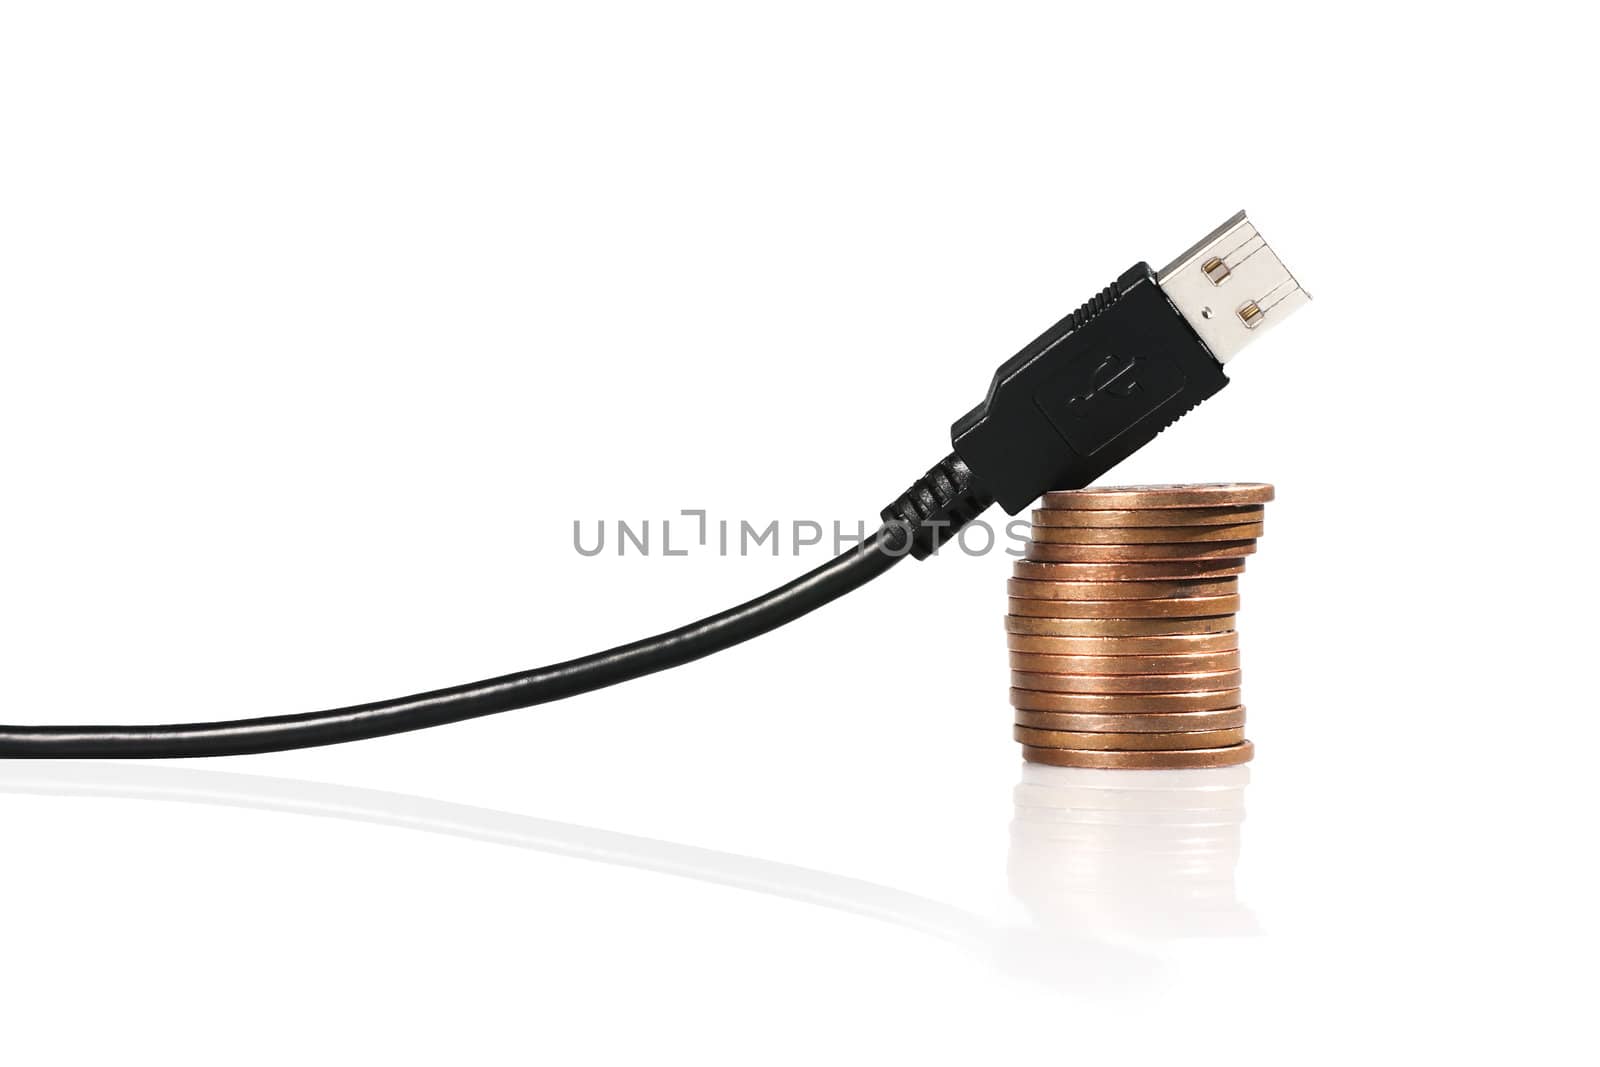 USB cable in the shape of the graph, supported by stack of coins